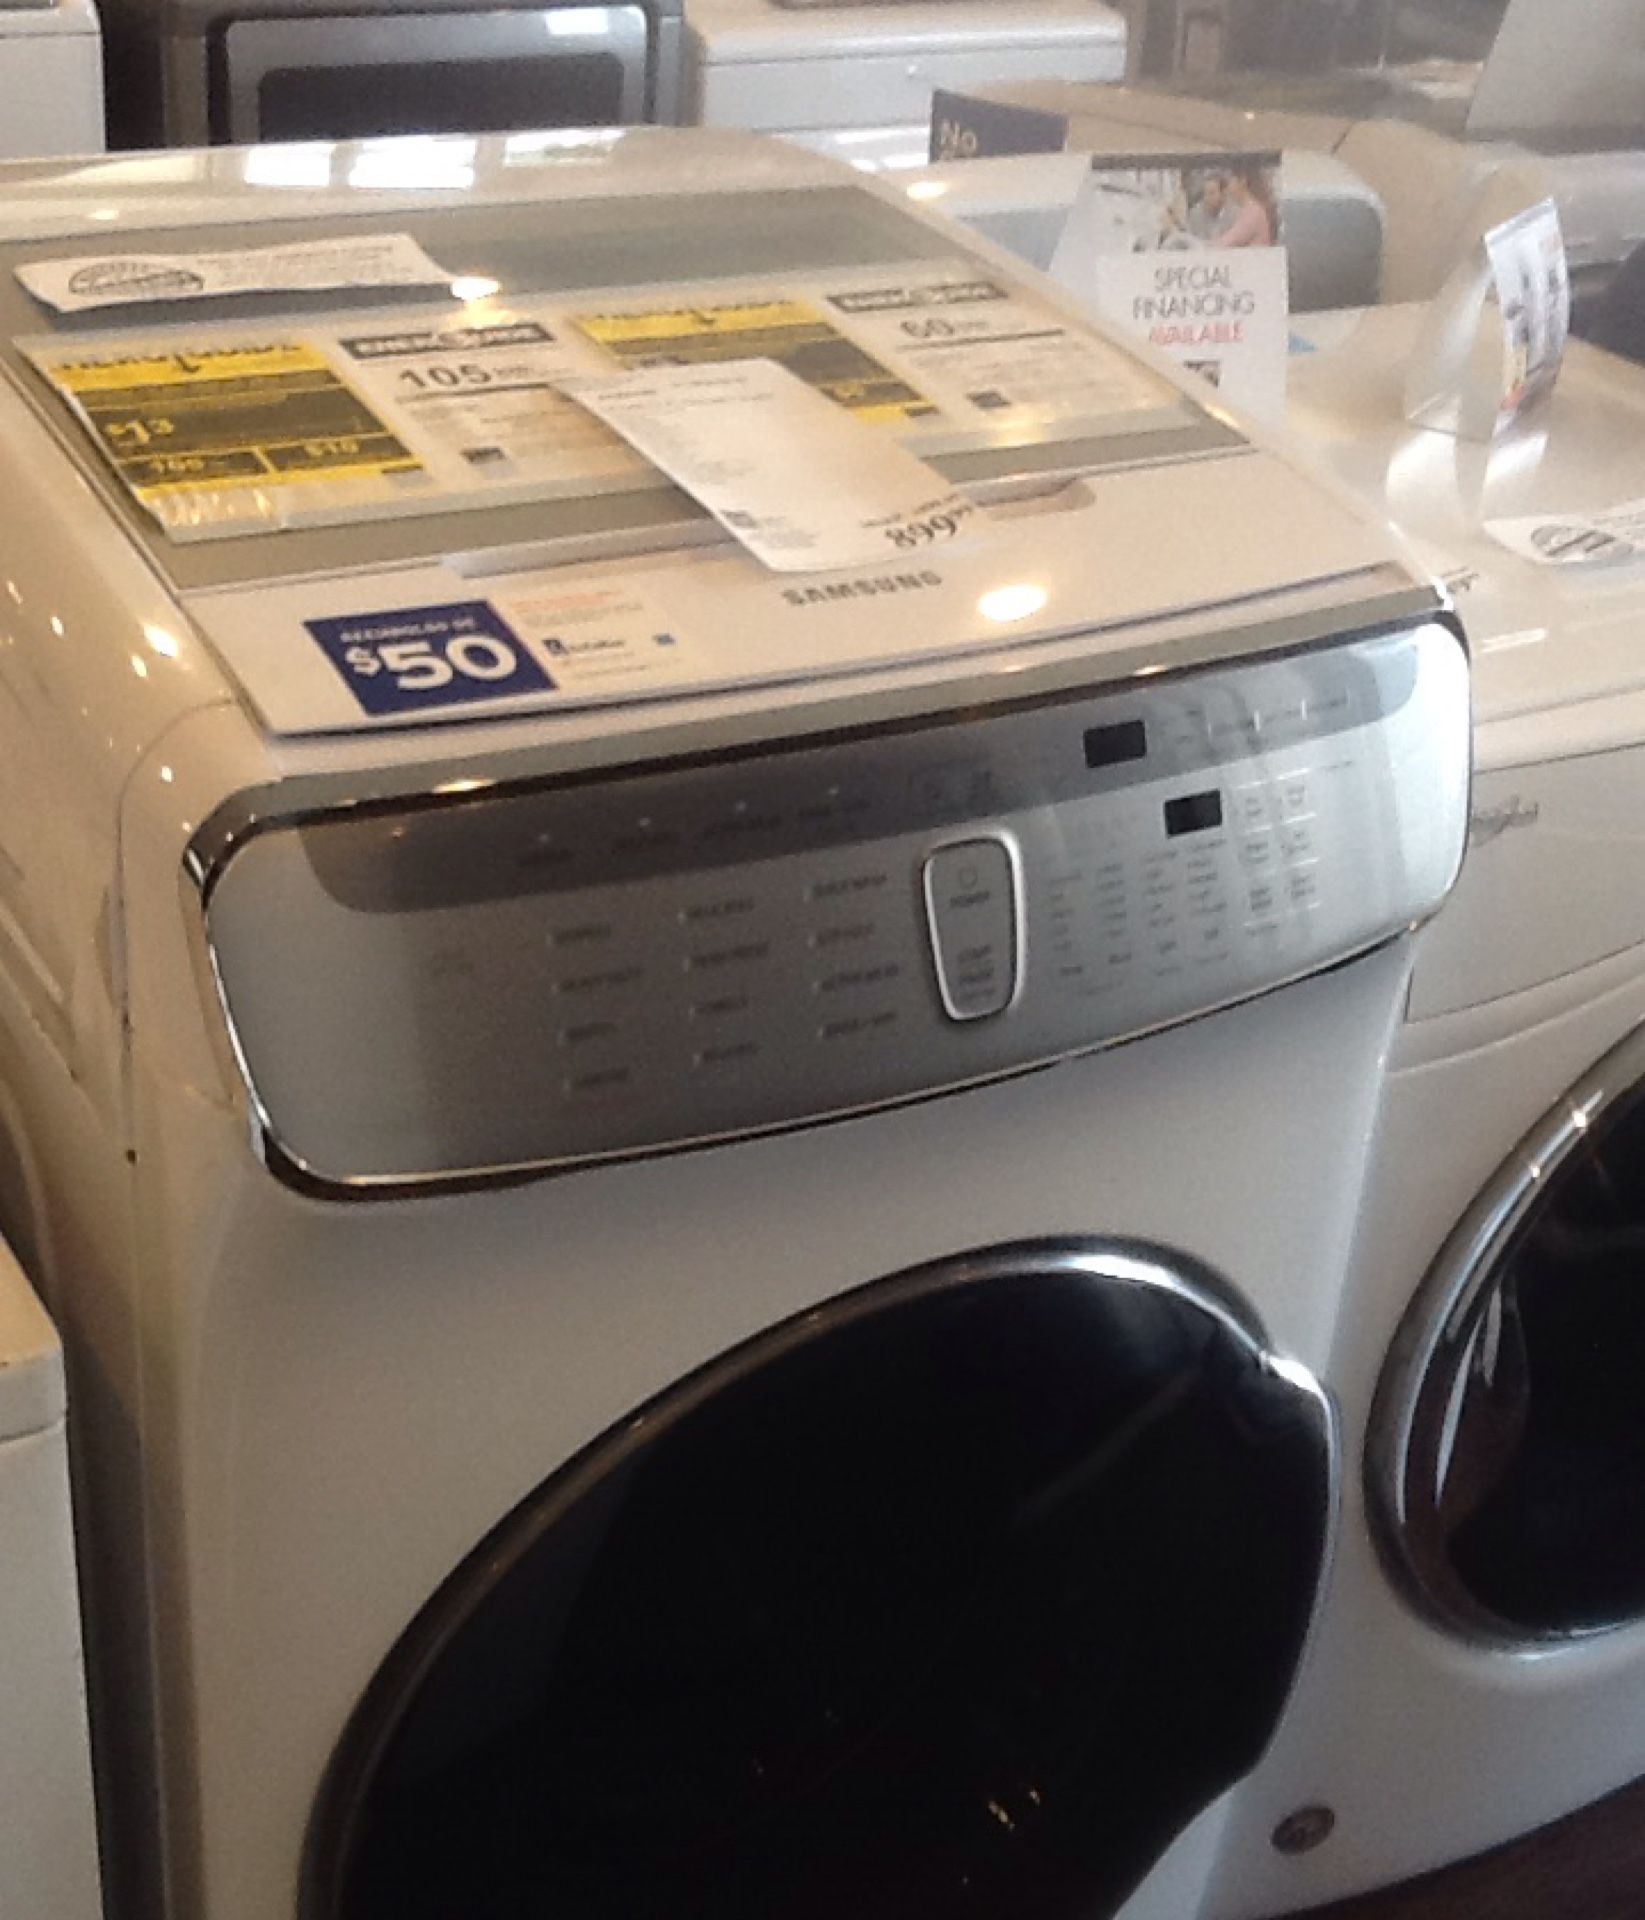 New open box Samsung washer WV60M9900AW